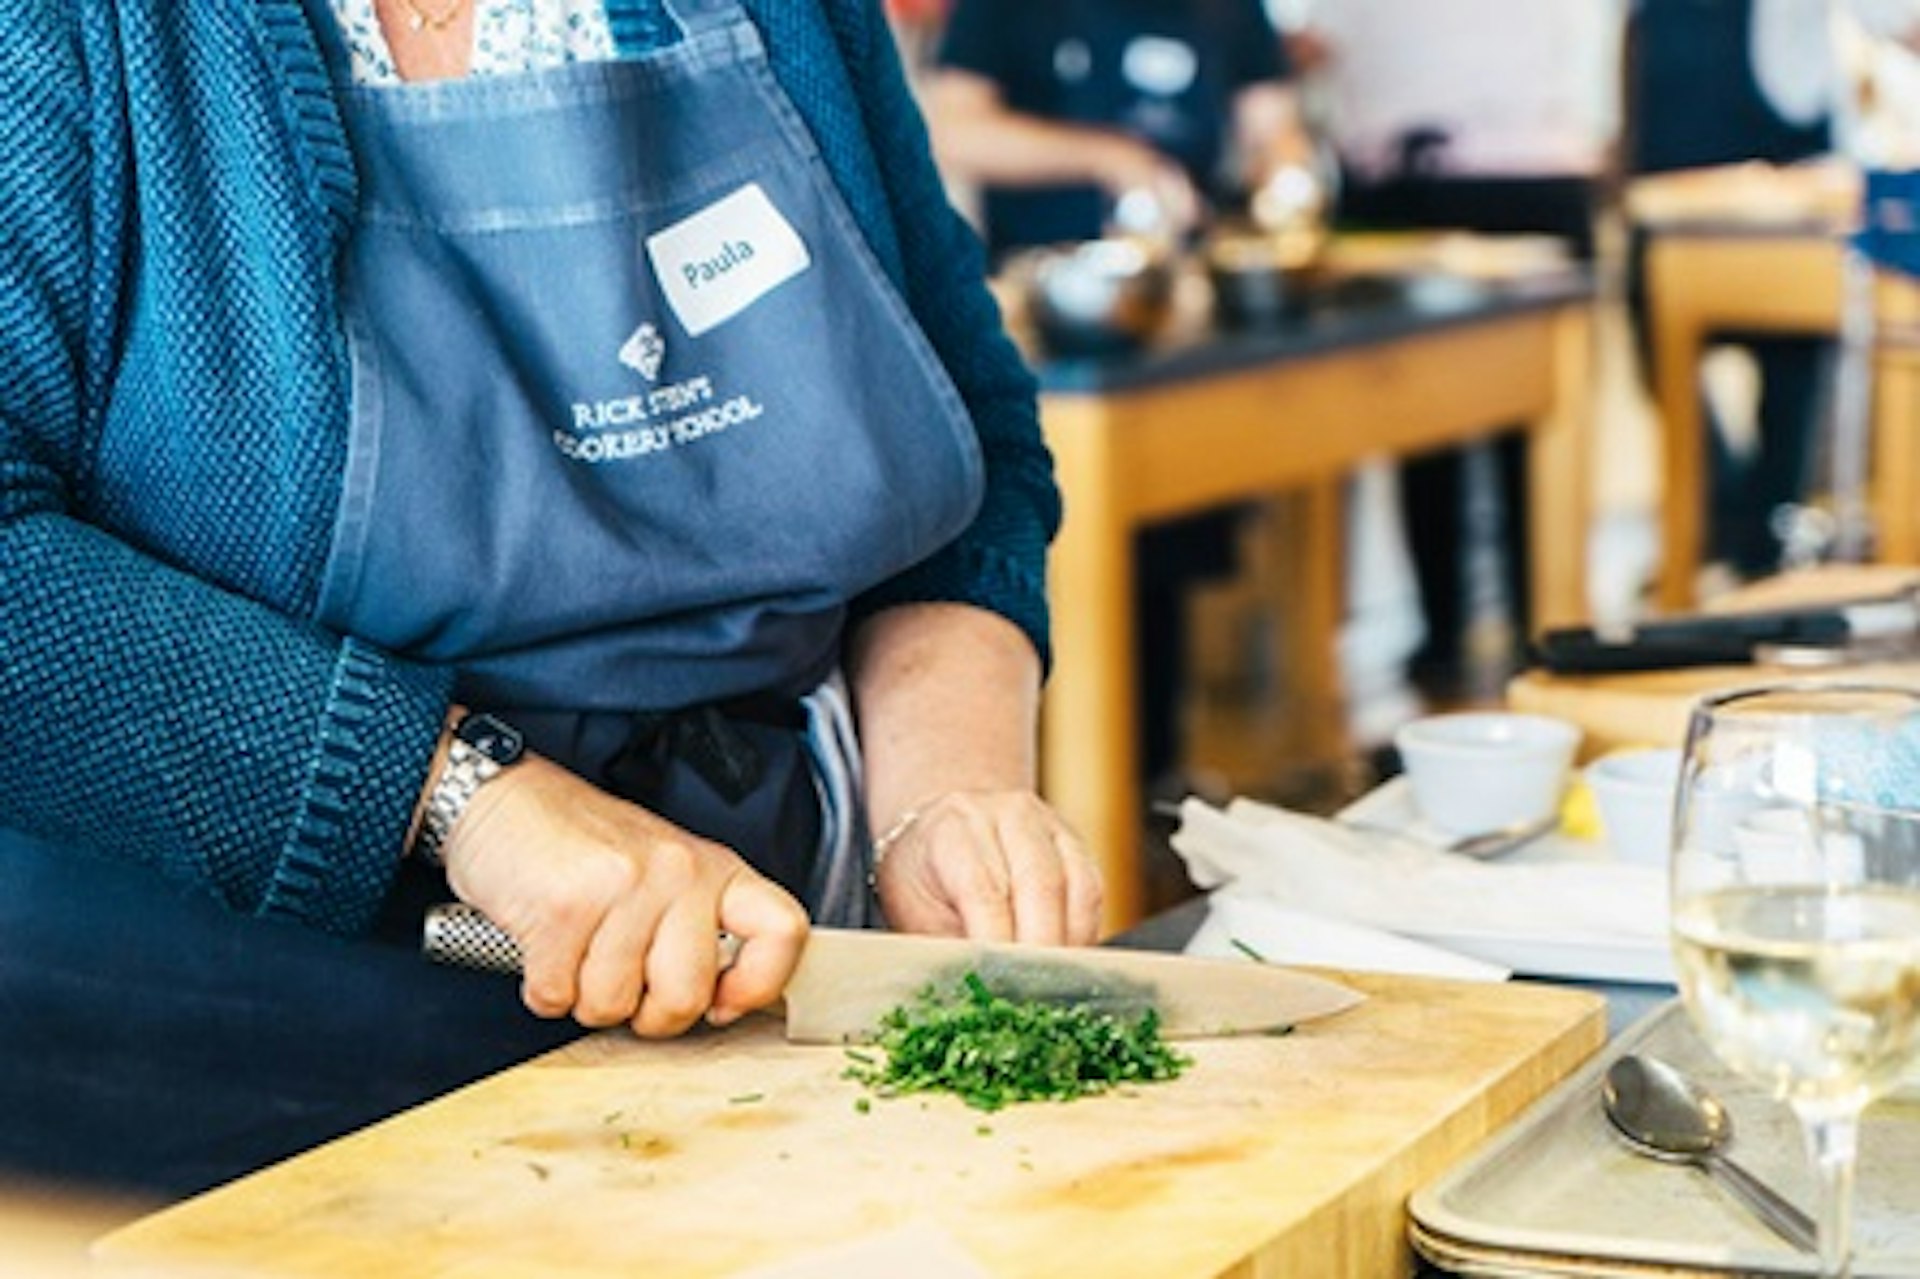 One Day Cookery Course at Rick Stein’s Cookery School 2